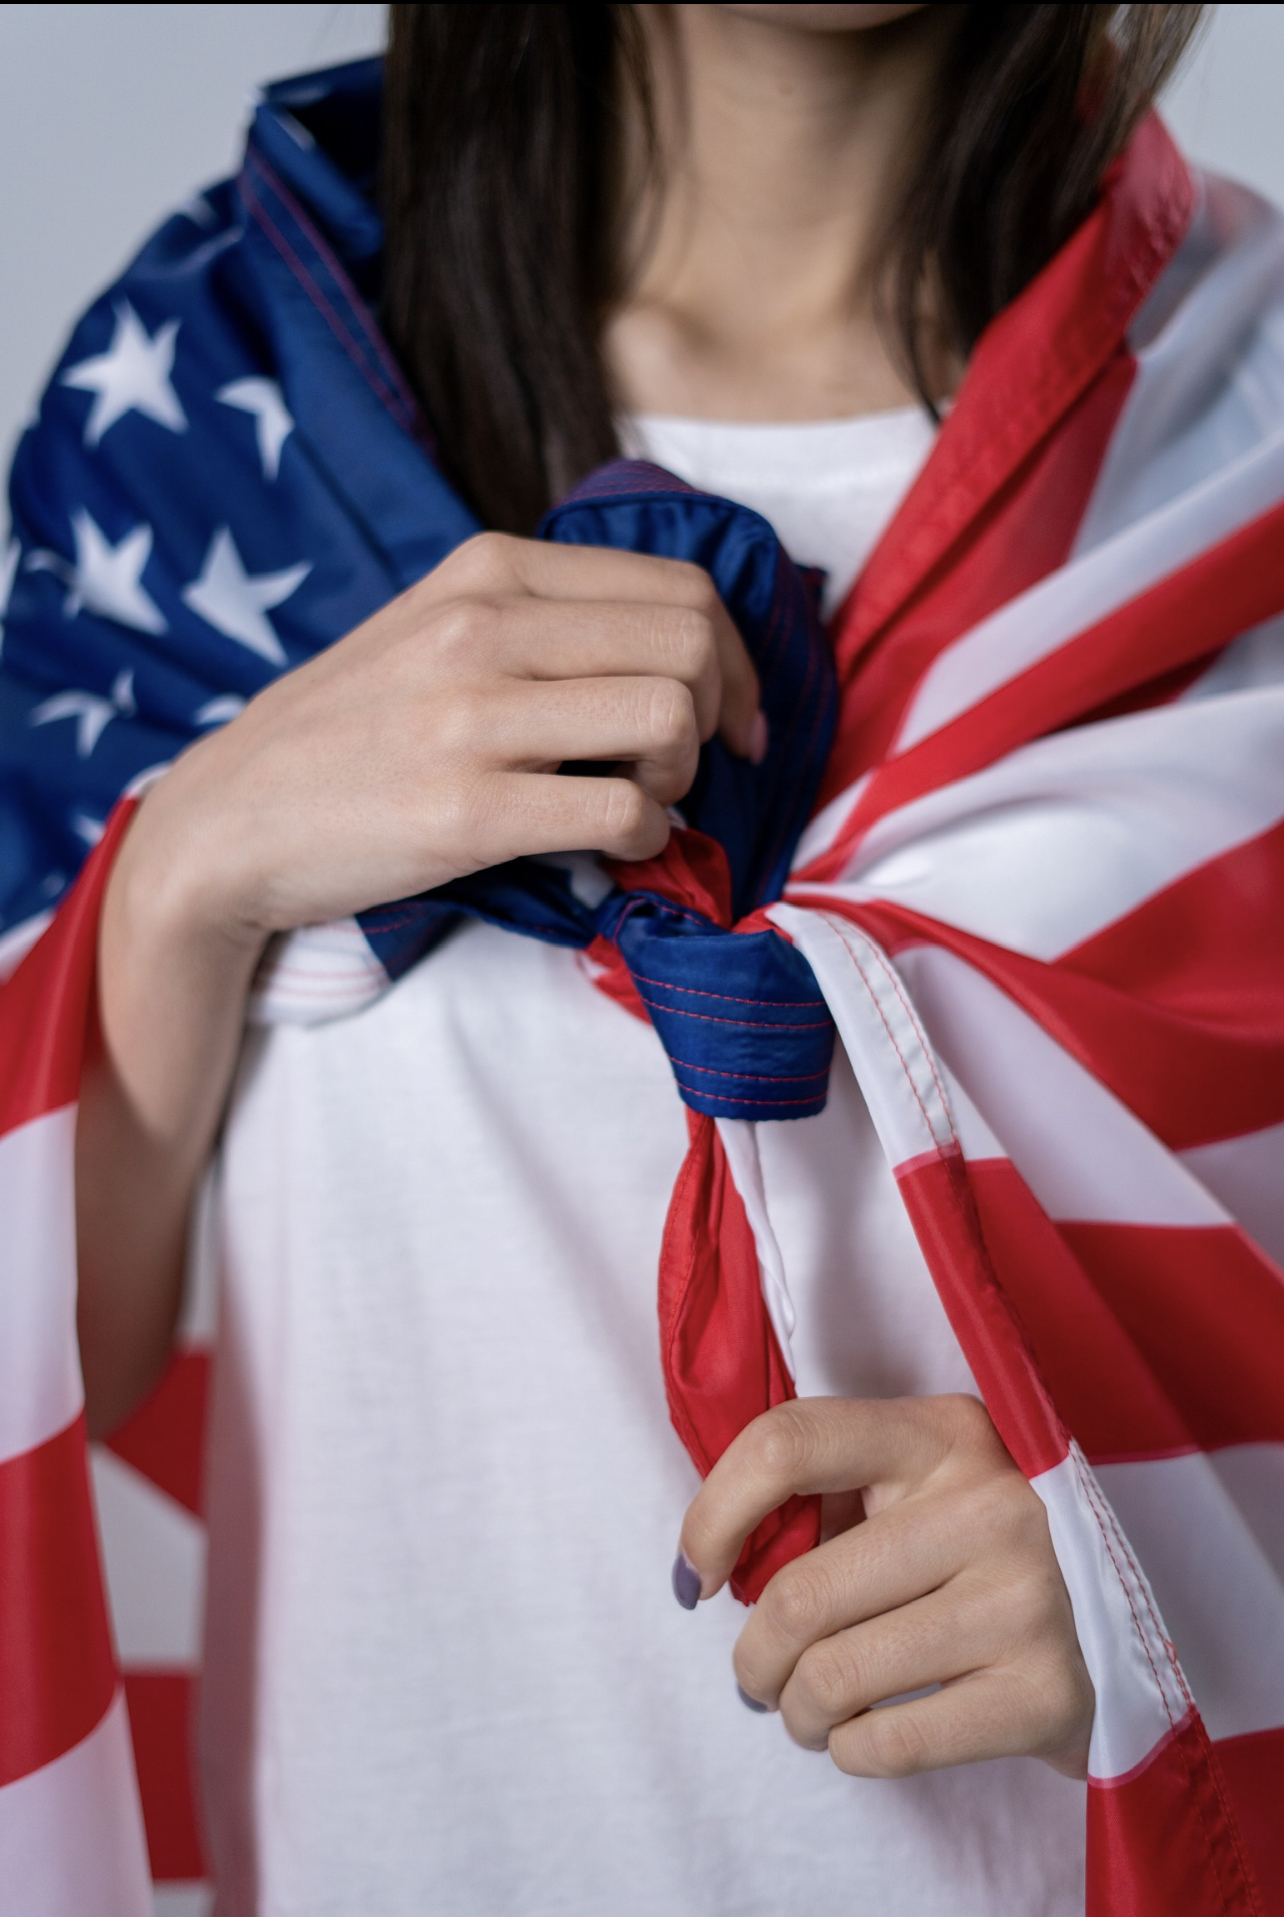 How to Apply for a Student Visa in the USA - Requirements, Processing Time & Cost